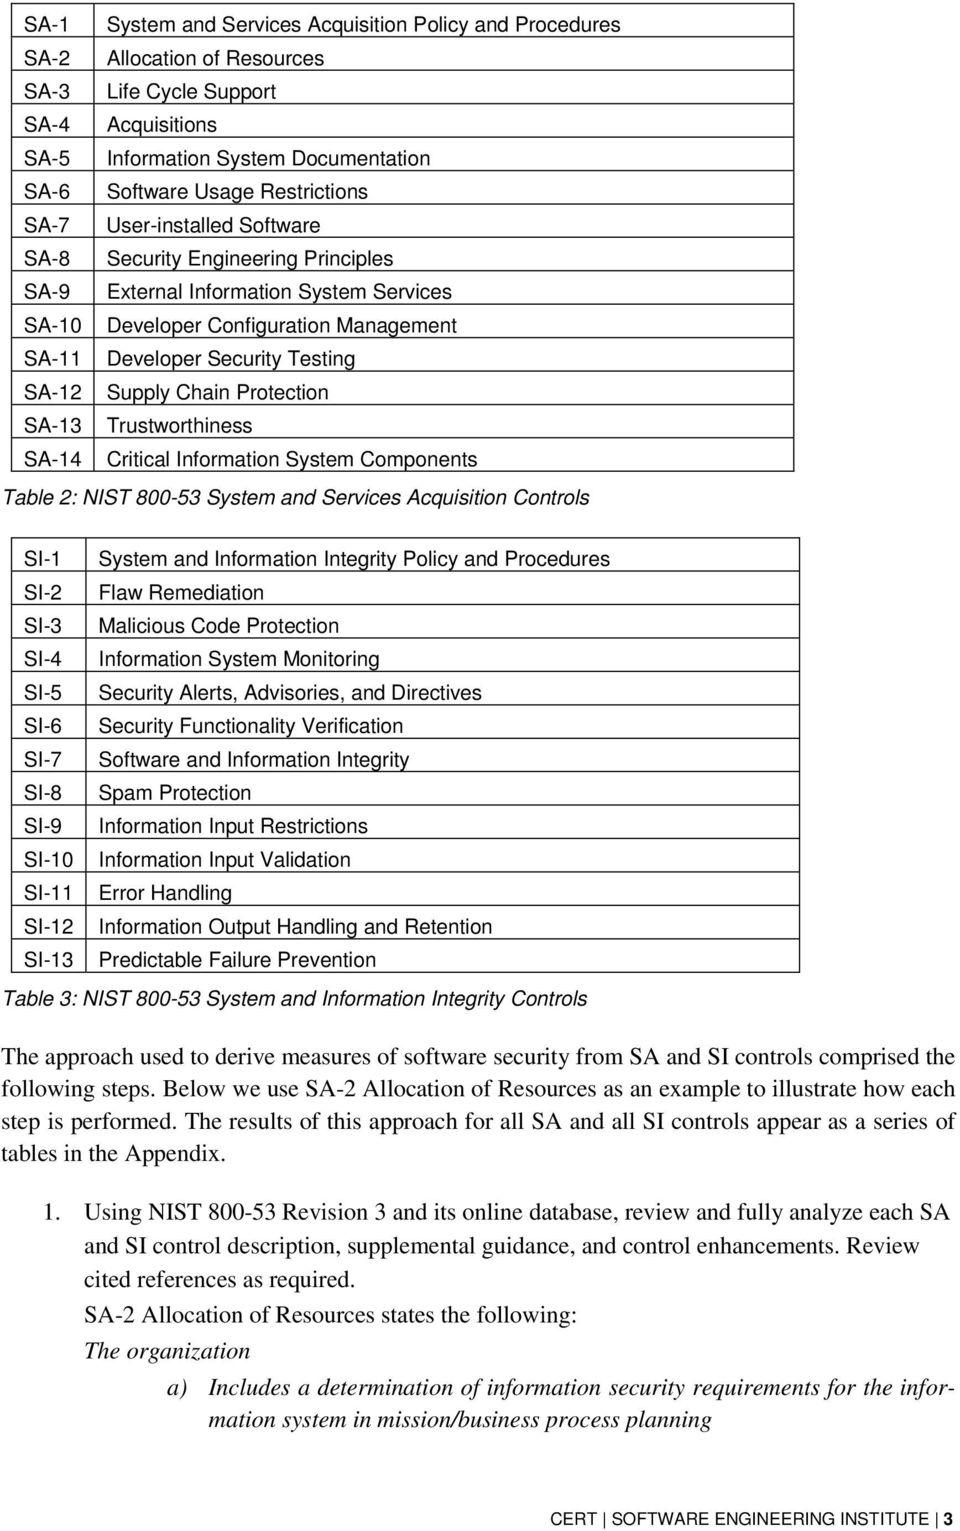 Critical System Components Table 2: NIST 800-53 Services Acquisition SI-1 SI-2 SI-3 SI-4 SI-5 SI-6 SI-7 SI-8 SI-9 SI-10 SI-11 SI-12 SI-13 Integrity Policy and Procedures Flaw Remediation Malicious